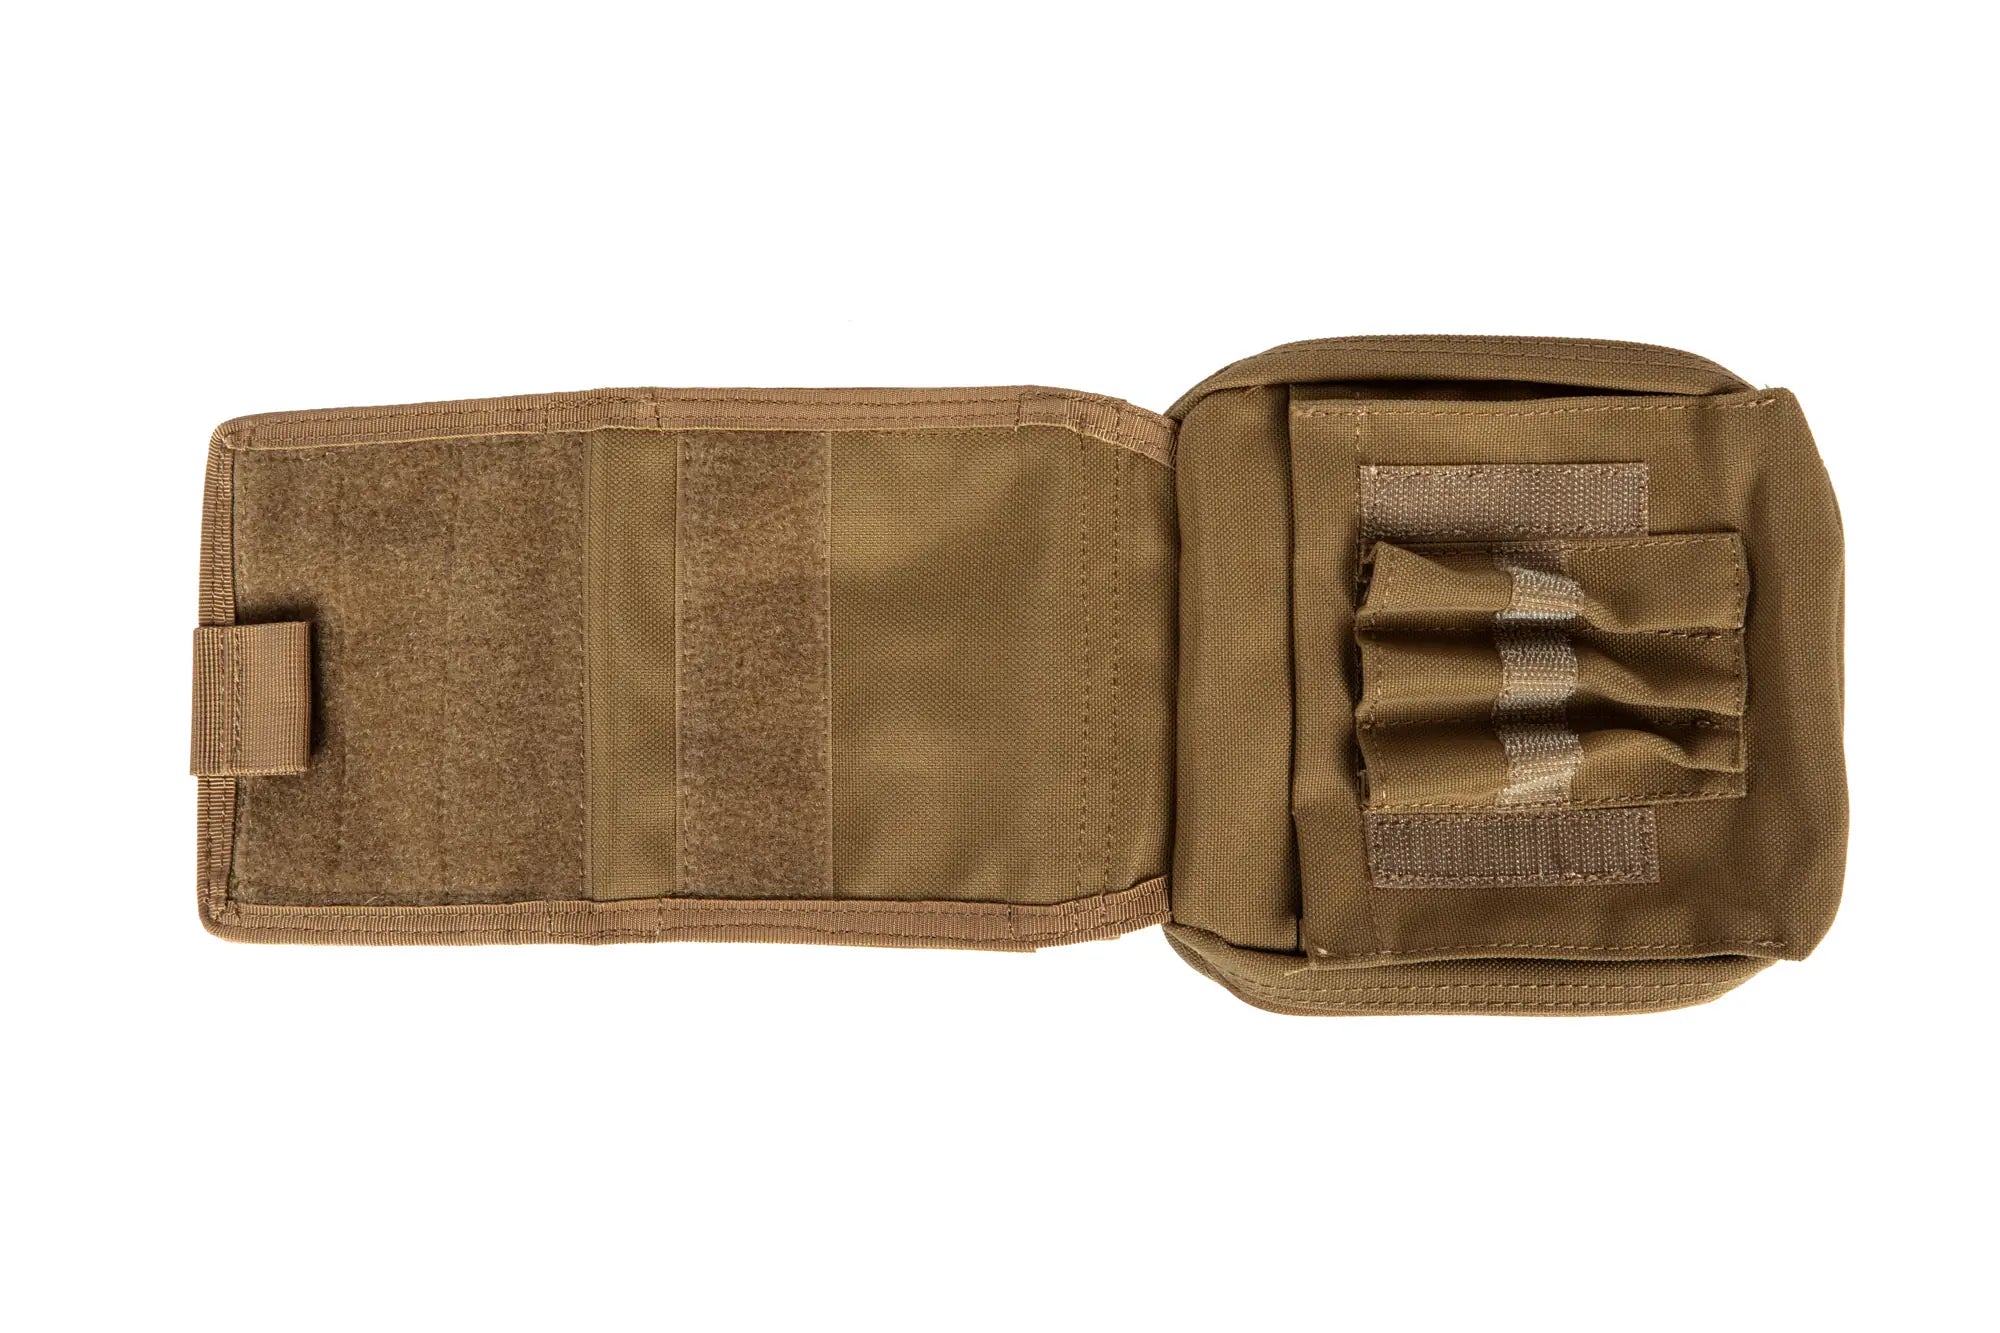 Administrative Panel with Map Pouch - Tan-7